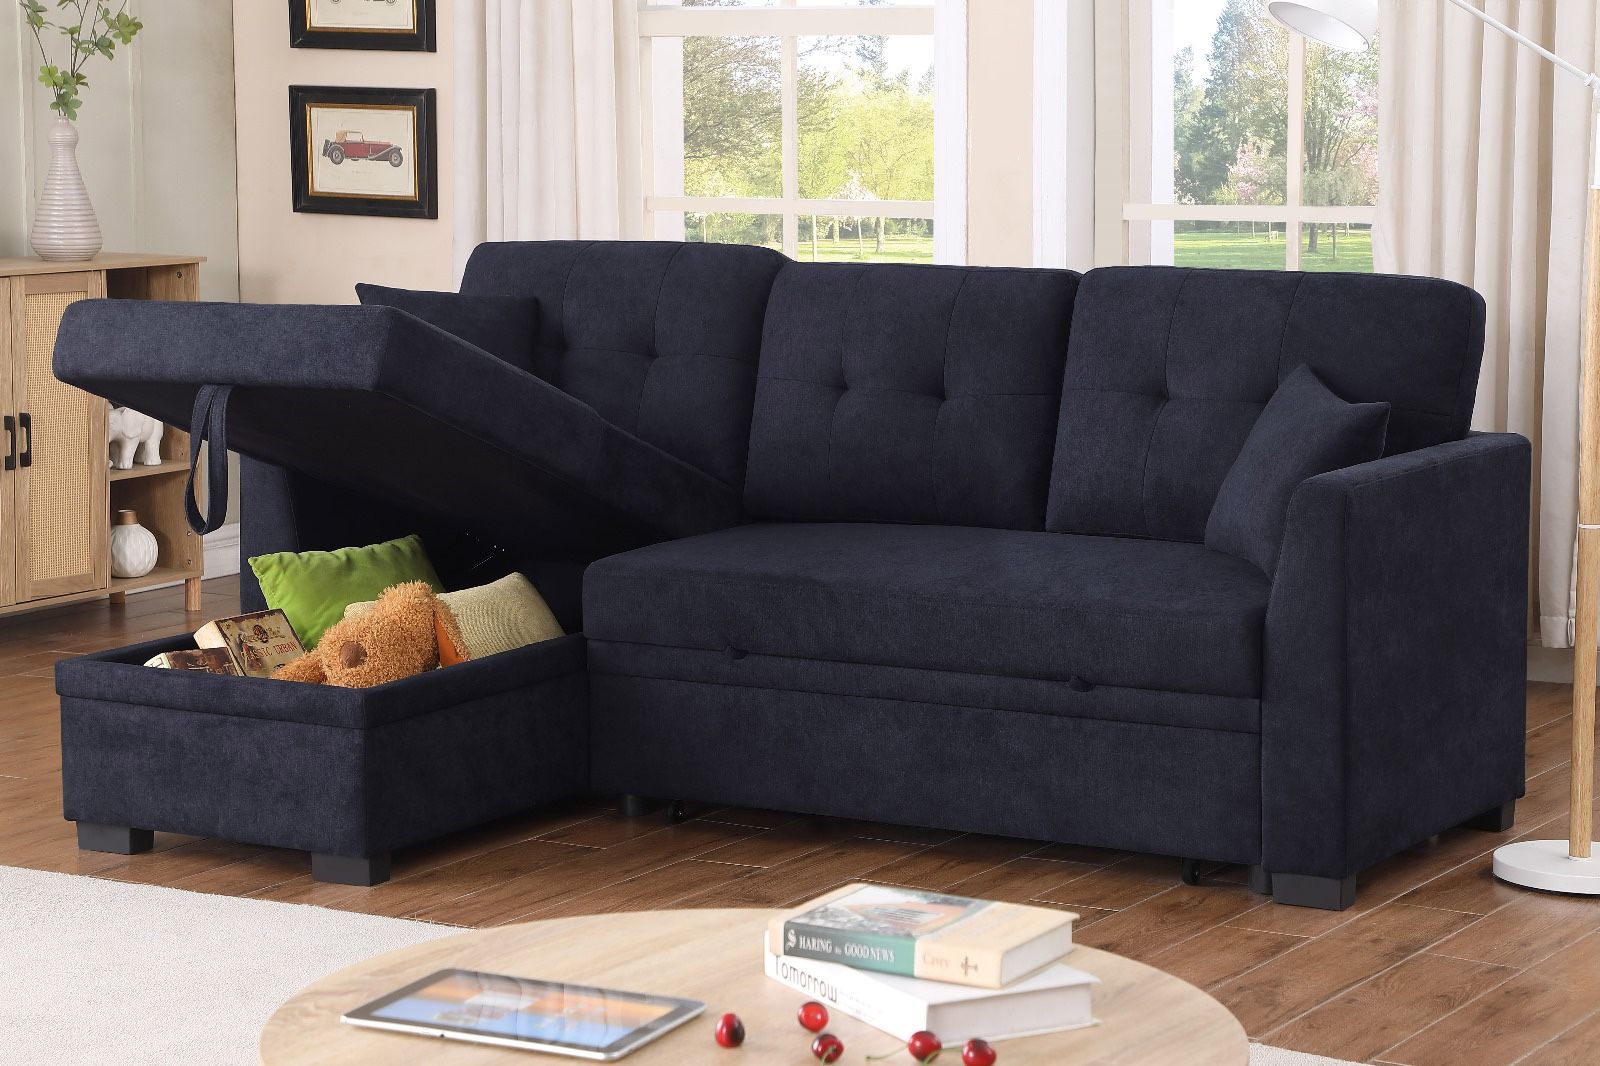 New! Reversible Sectional Sofa Bed, Sofabed, Small Sectional Sofabed, Small Living Room Sectional, Sofabed, Sleeper Sofa, Couch